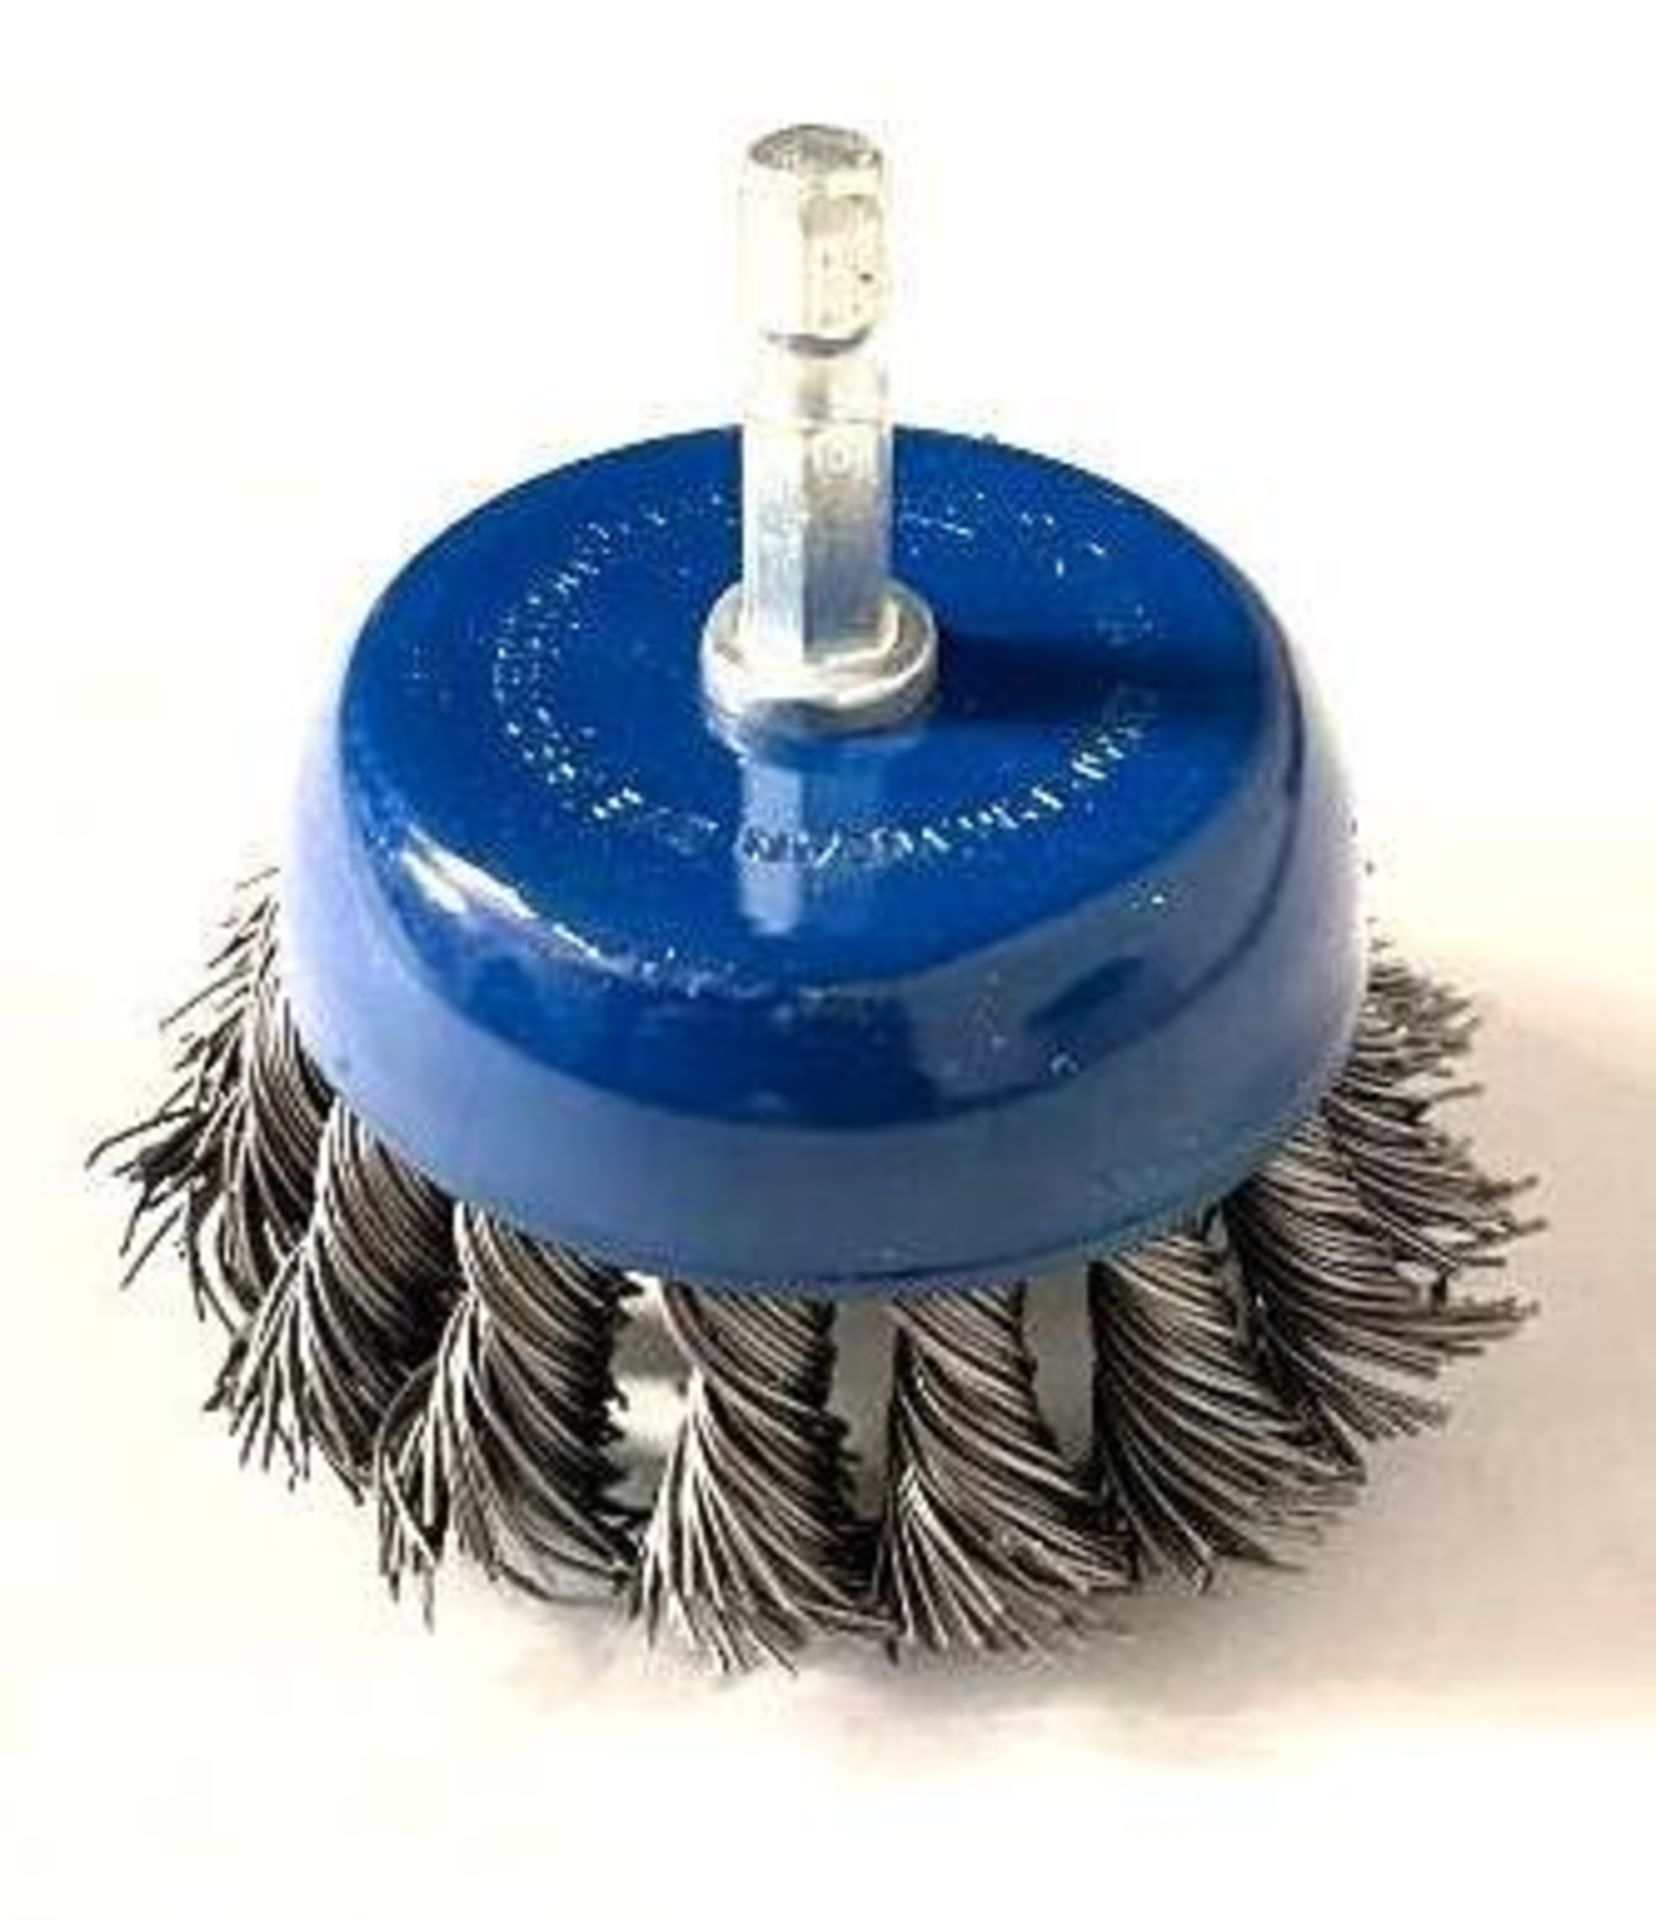 400CT 3" KNOTTED CUP WIRE BRUSHES WITH 1/4" SHANK BRAND/MODEL EAZYPOWER 87935 ADDITIONAL INFO TOTAL